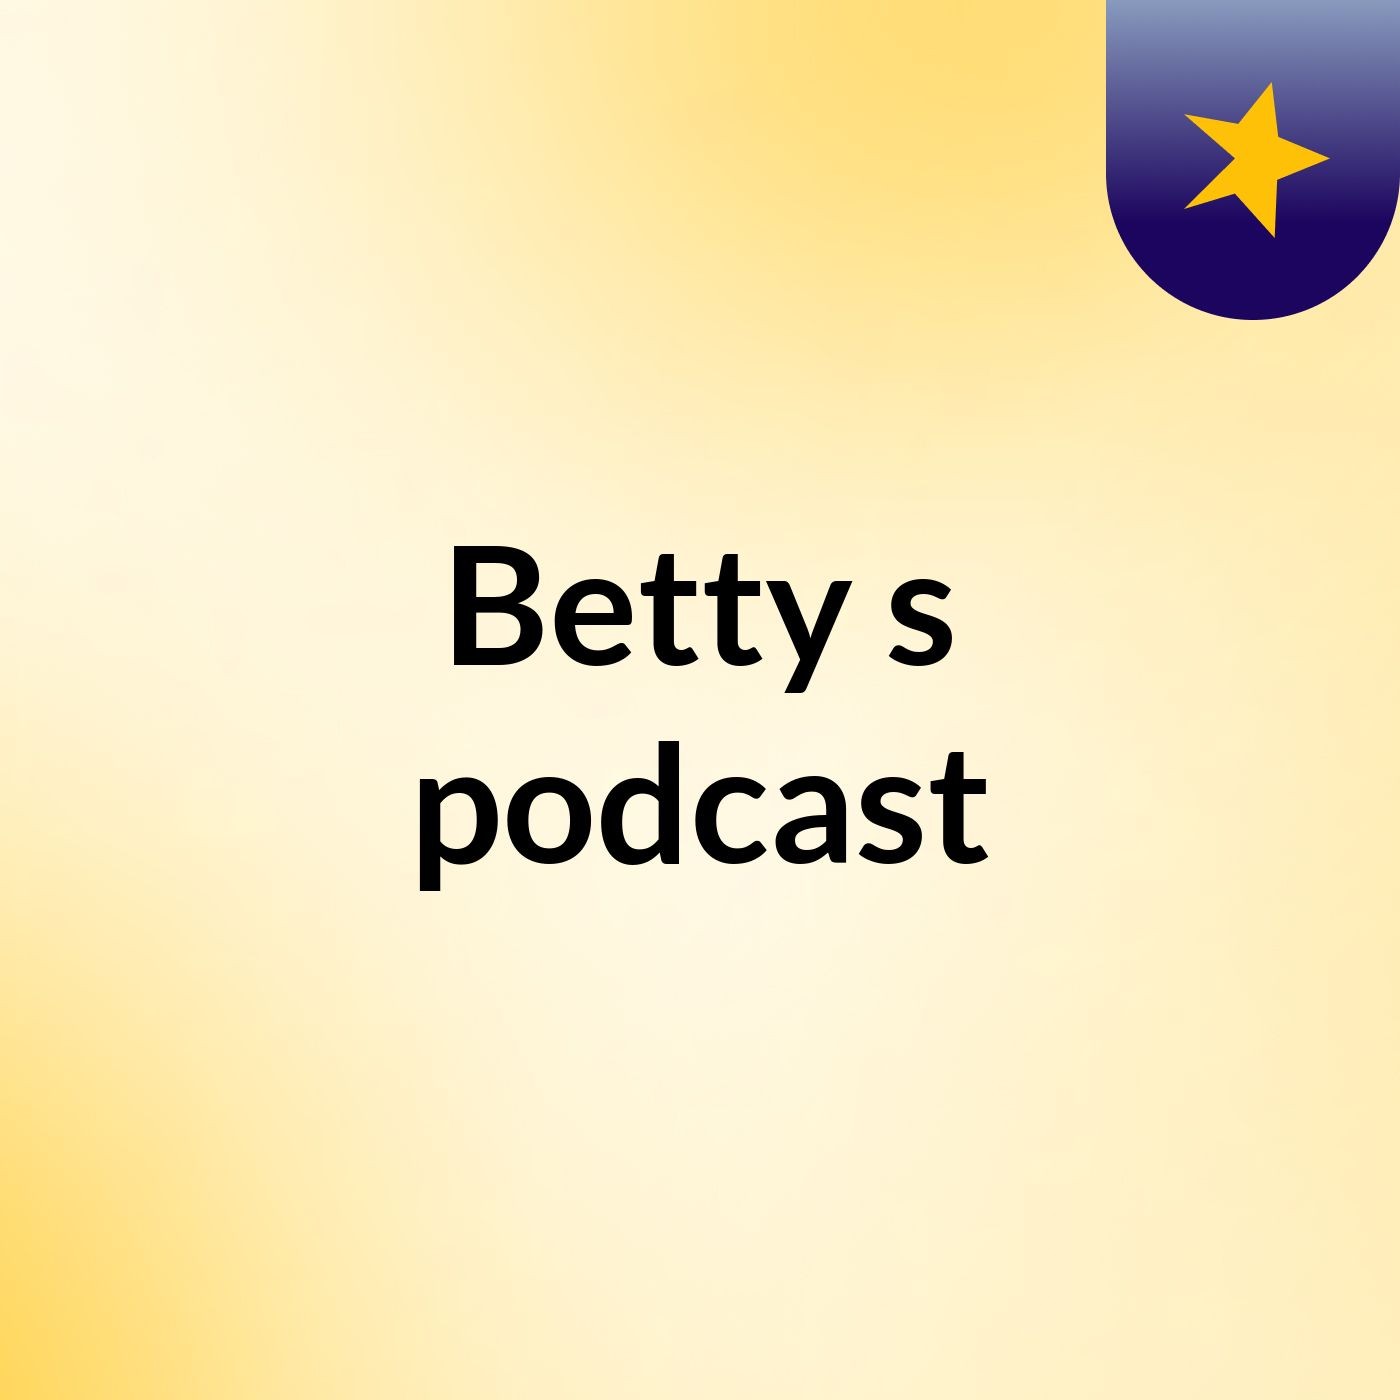 Episode 3 - Betty's podcast